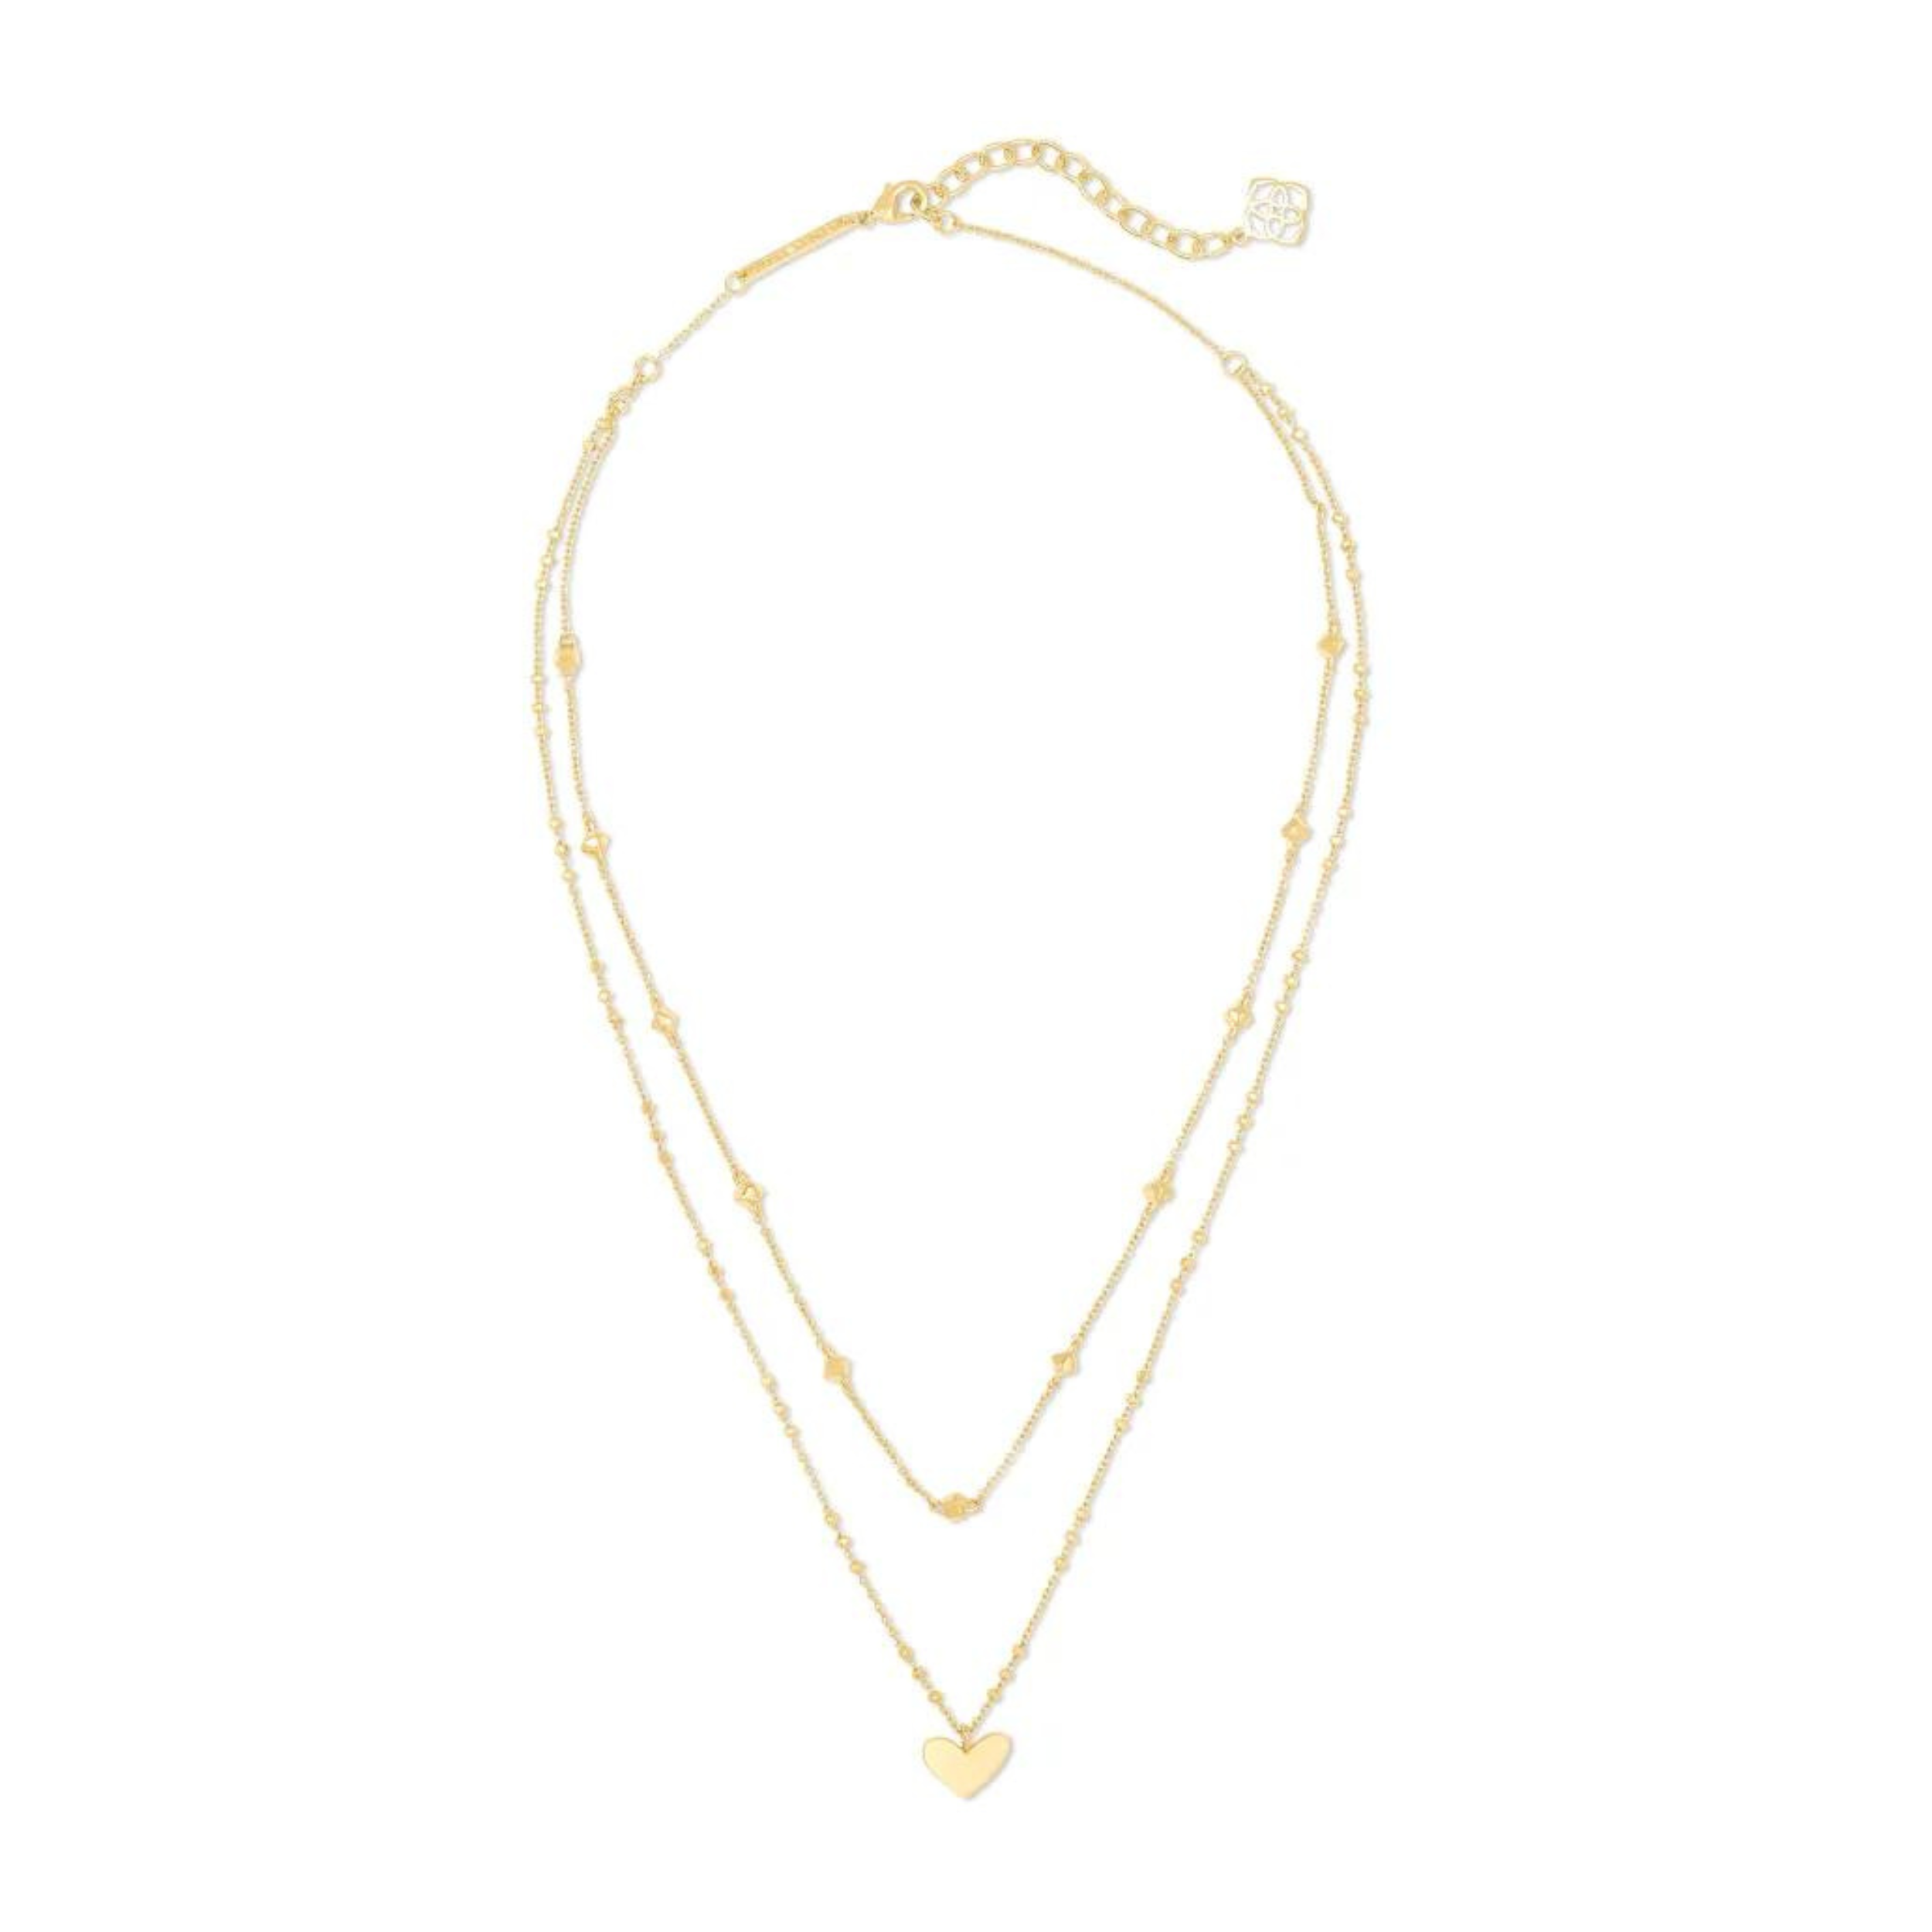 Kendra Scott | Ari Heart Multi Strand Necklace in Gold - Giddy Up Glamour Boutique